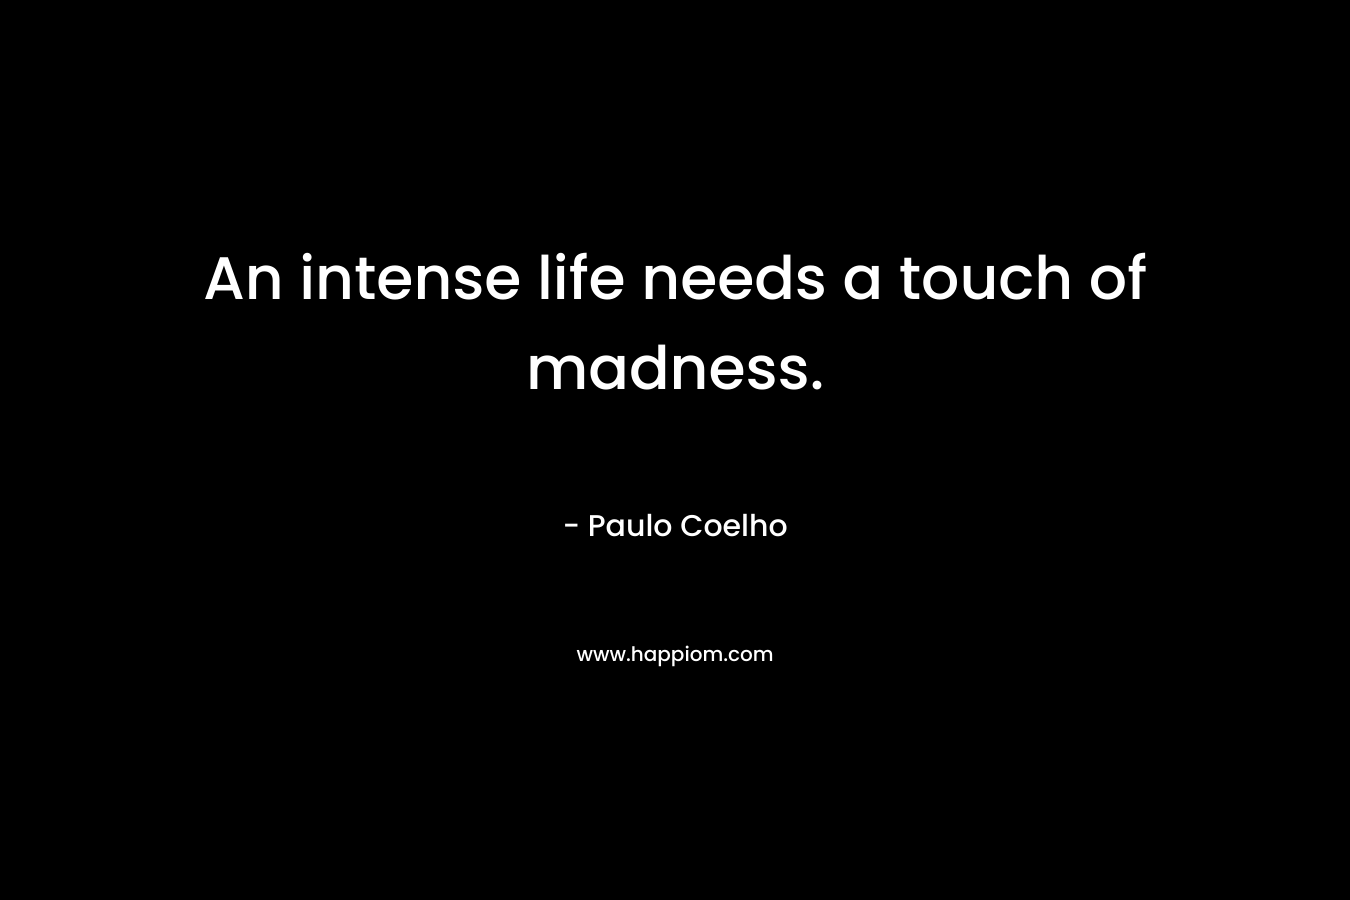 An intense life needs a touch of madness. – Paulo Coelho